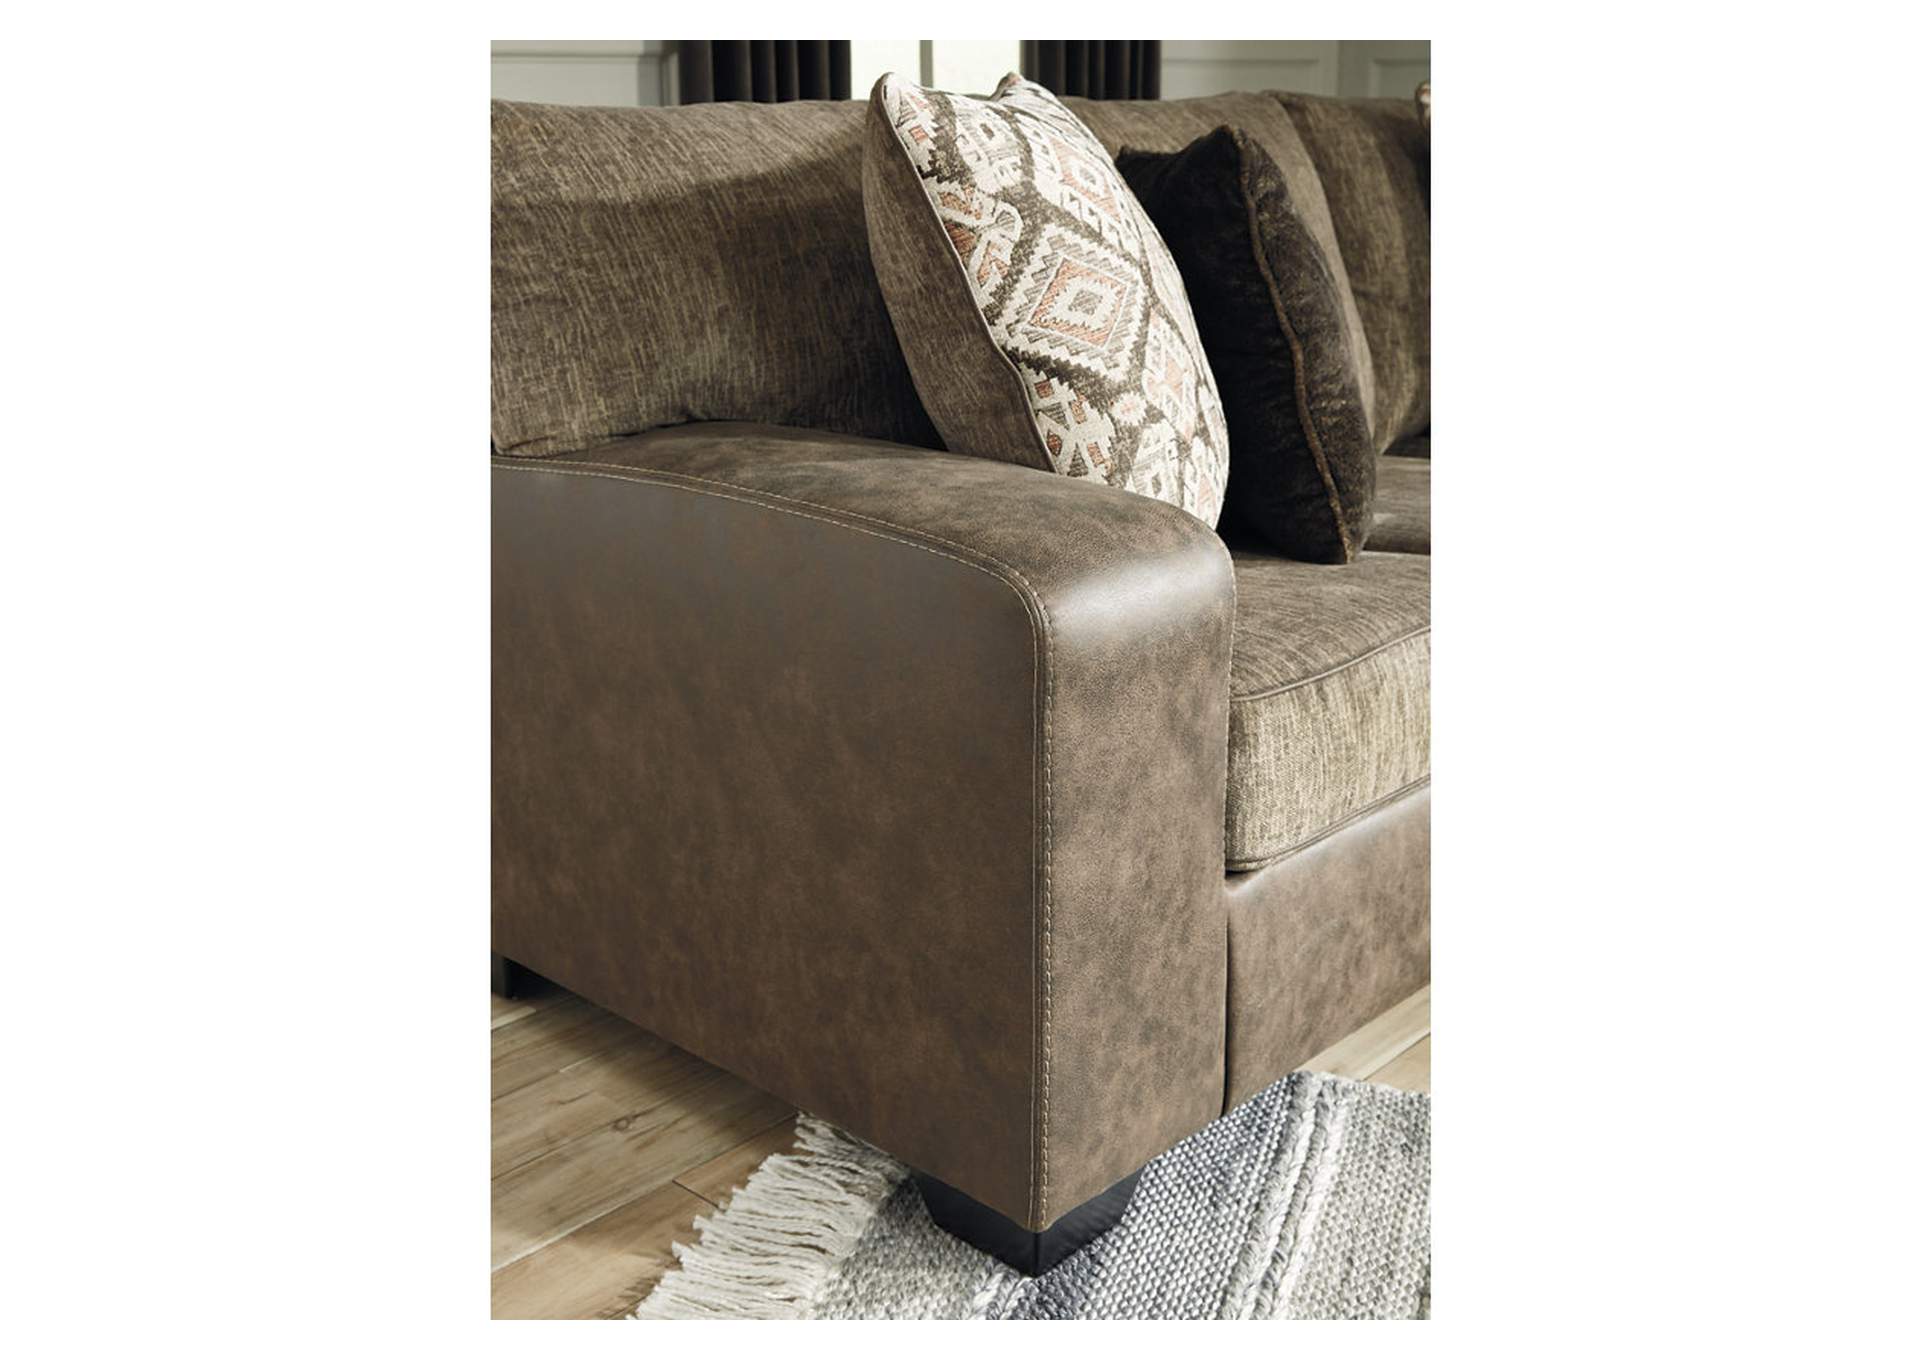 Abalone 3-Piece Sectional with Ottoman,Benchcraft